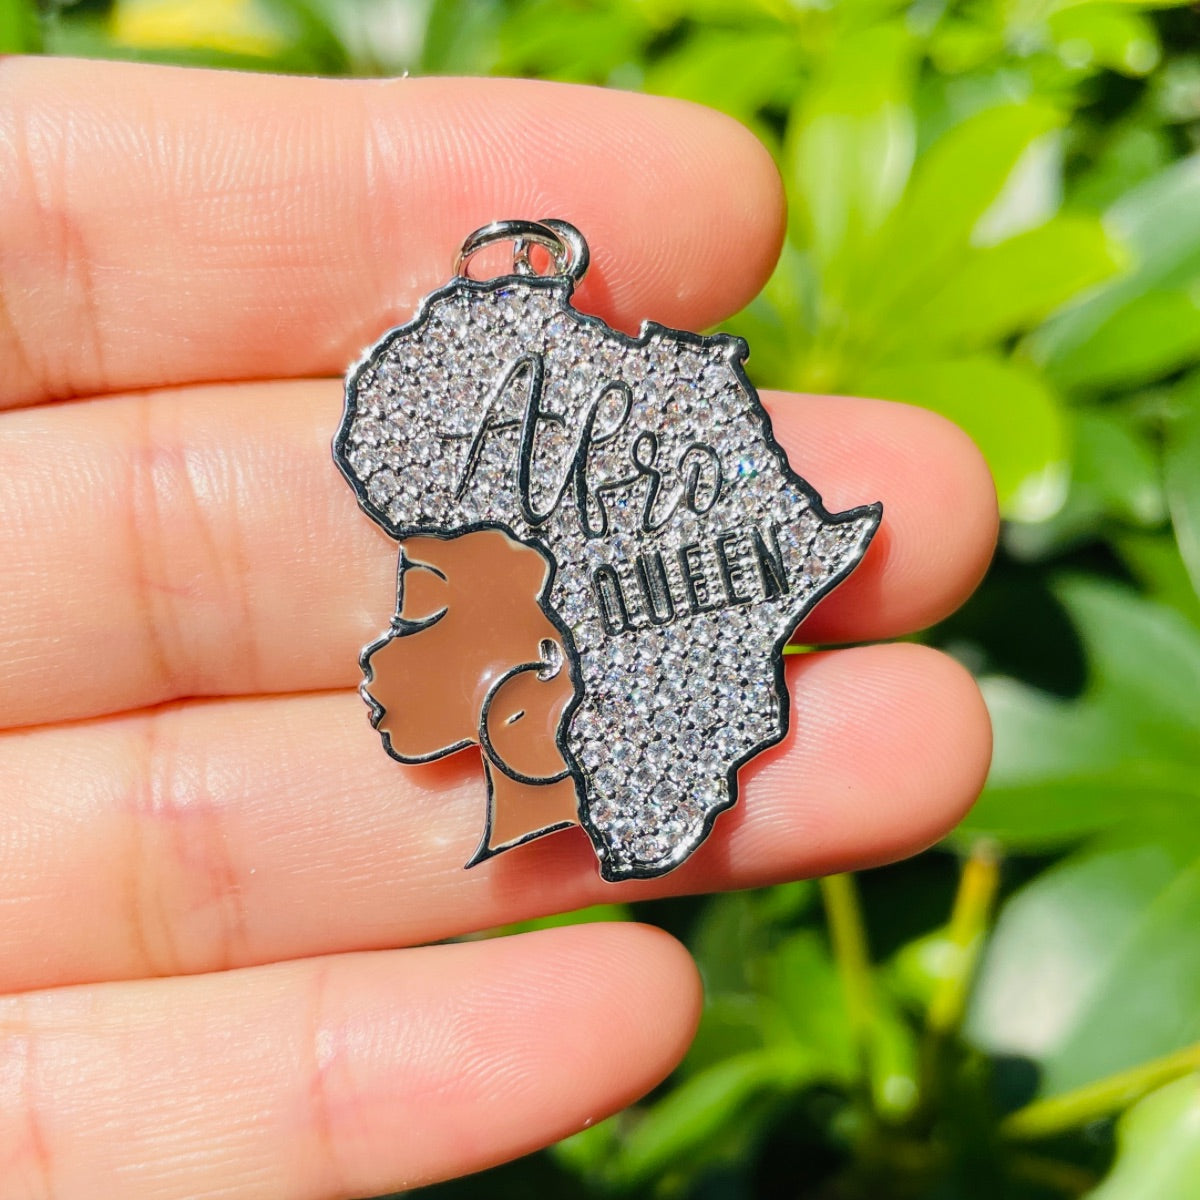 10pcs/lot Mix CZ Pave Afro Black Girls Charms Bundle 2-Silver CZ Paved Charms Afro Girl/Queen Charms Mix Charms Charms Beads Beyond